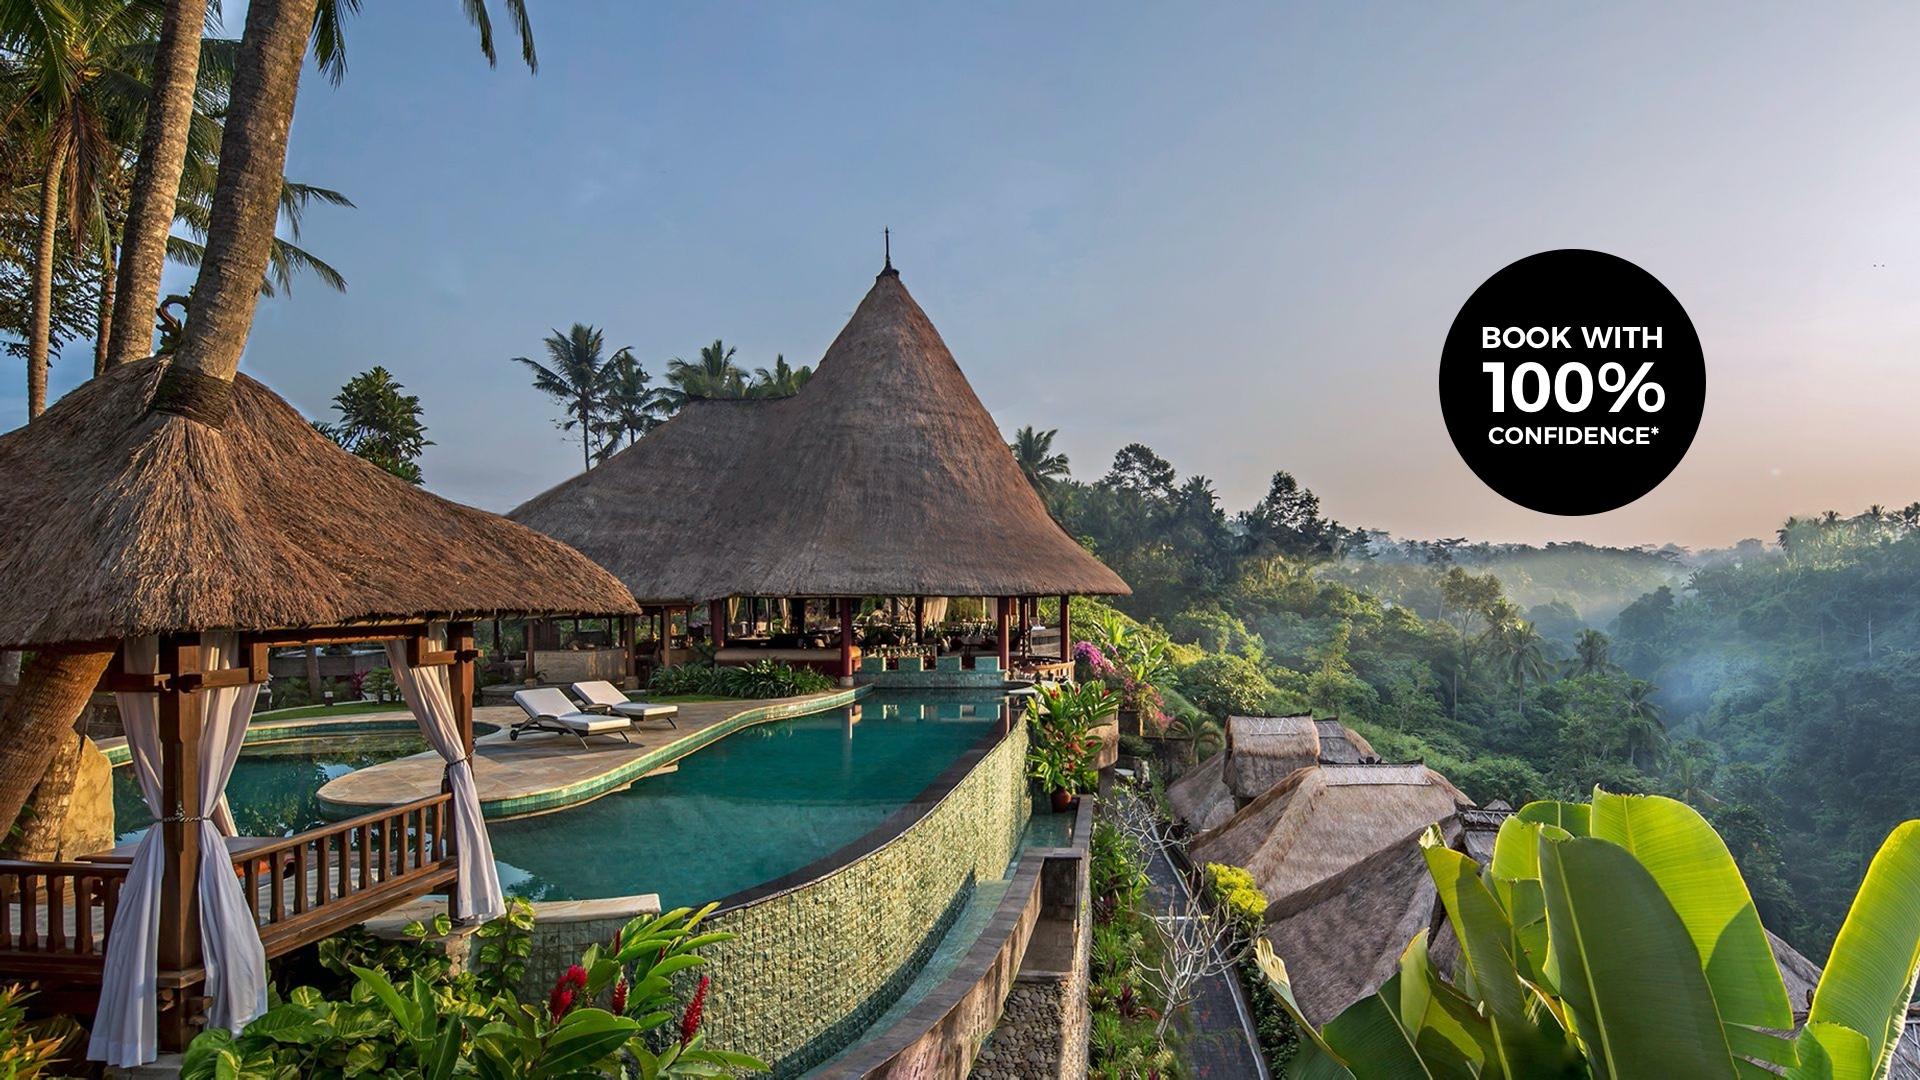 Bali Romantic Holiday Packages 2021/2022 Hotel + Flight Deals Luxury